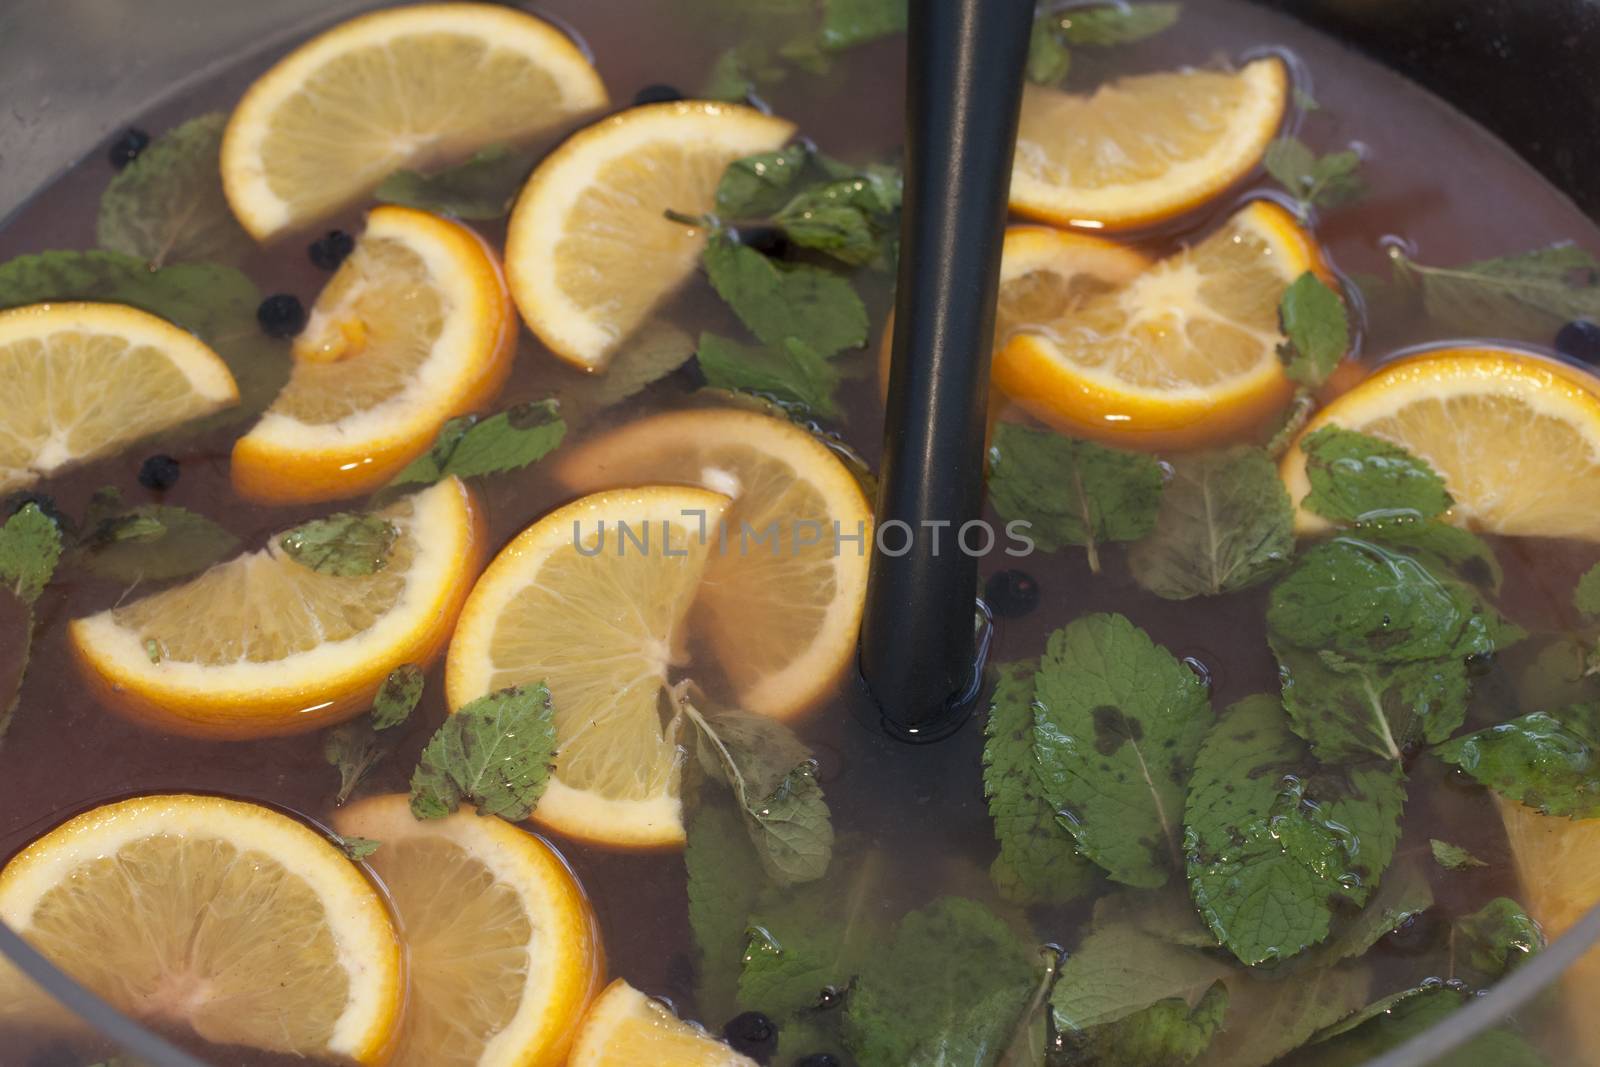 new sangria made with orange slices and mint leaves